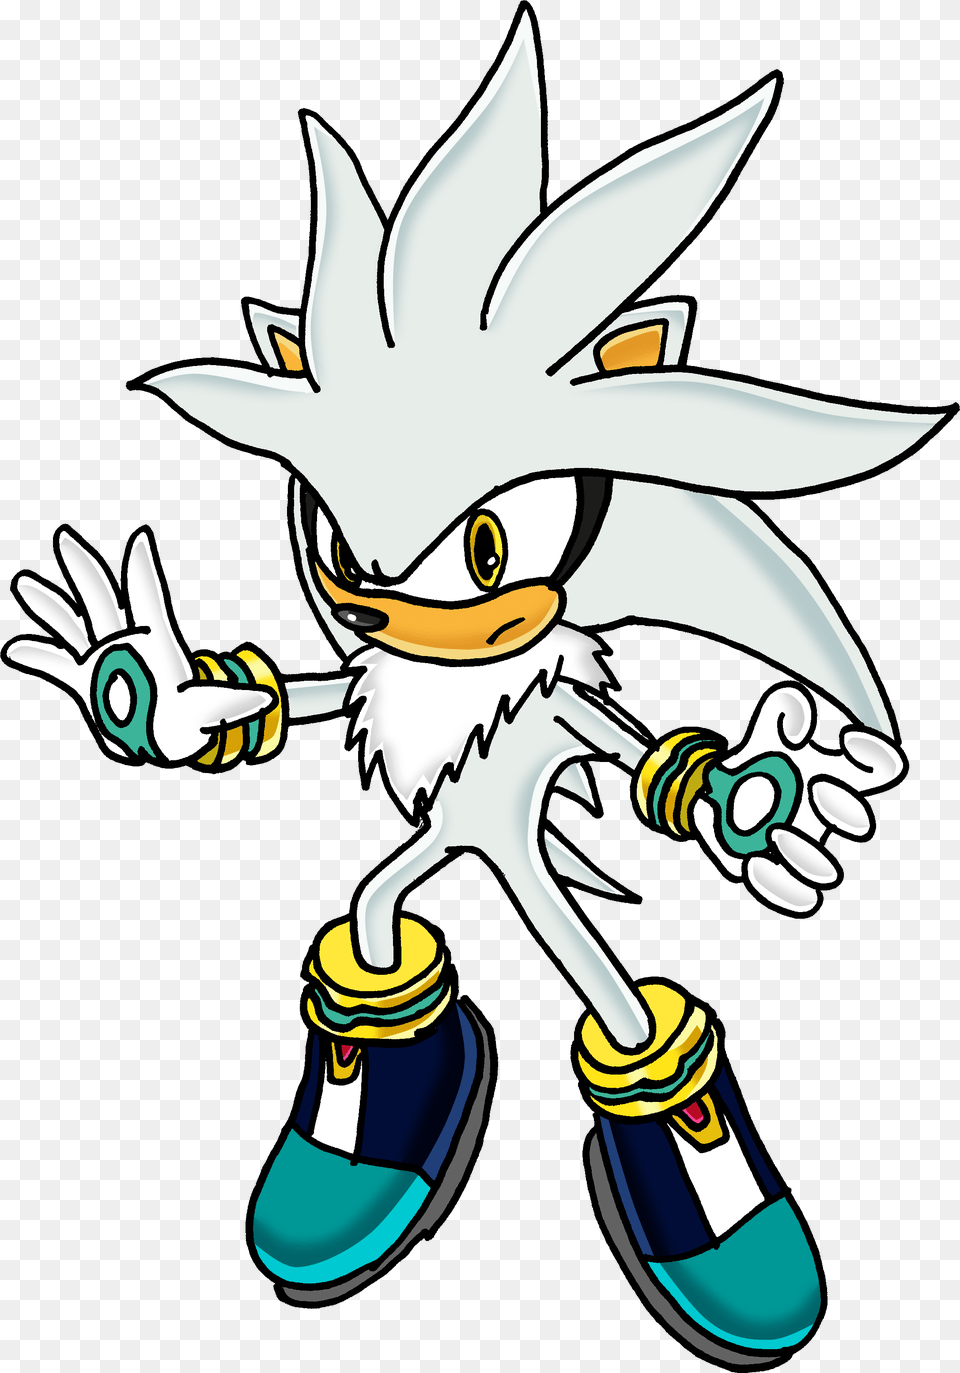 Silver The Hedgehog, Book, Comics, Publication, Clothing Png Image